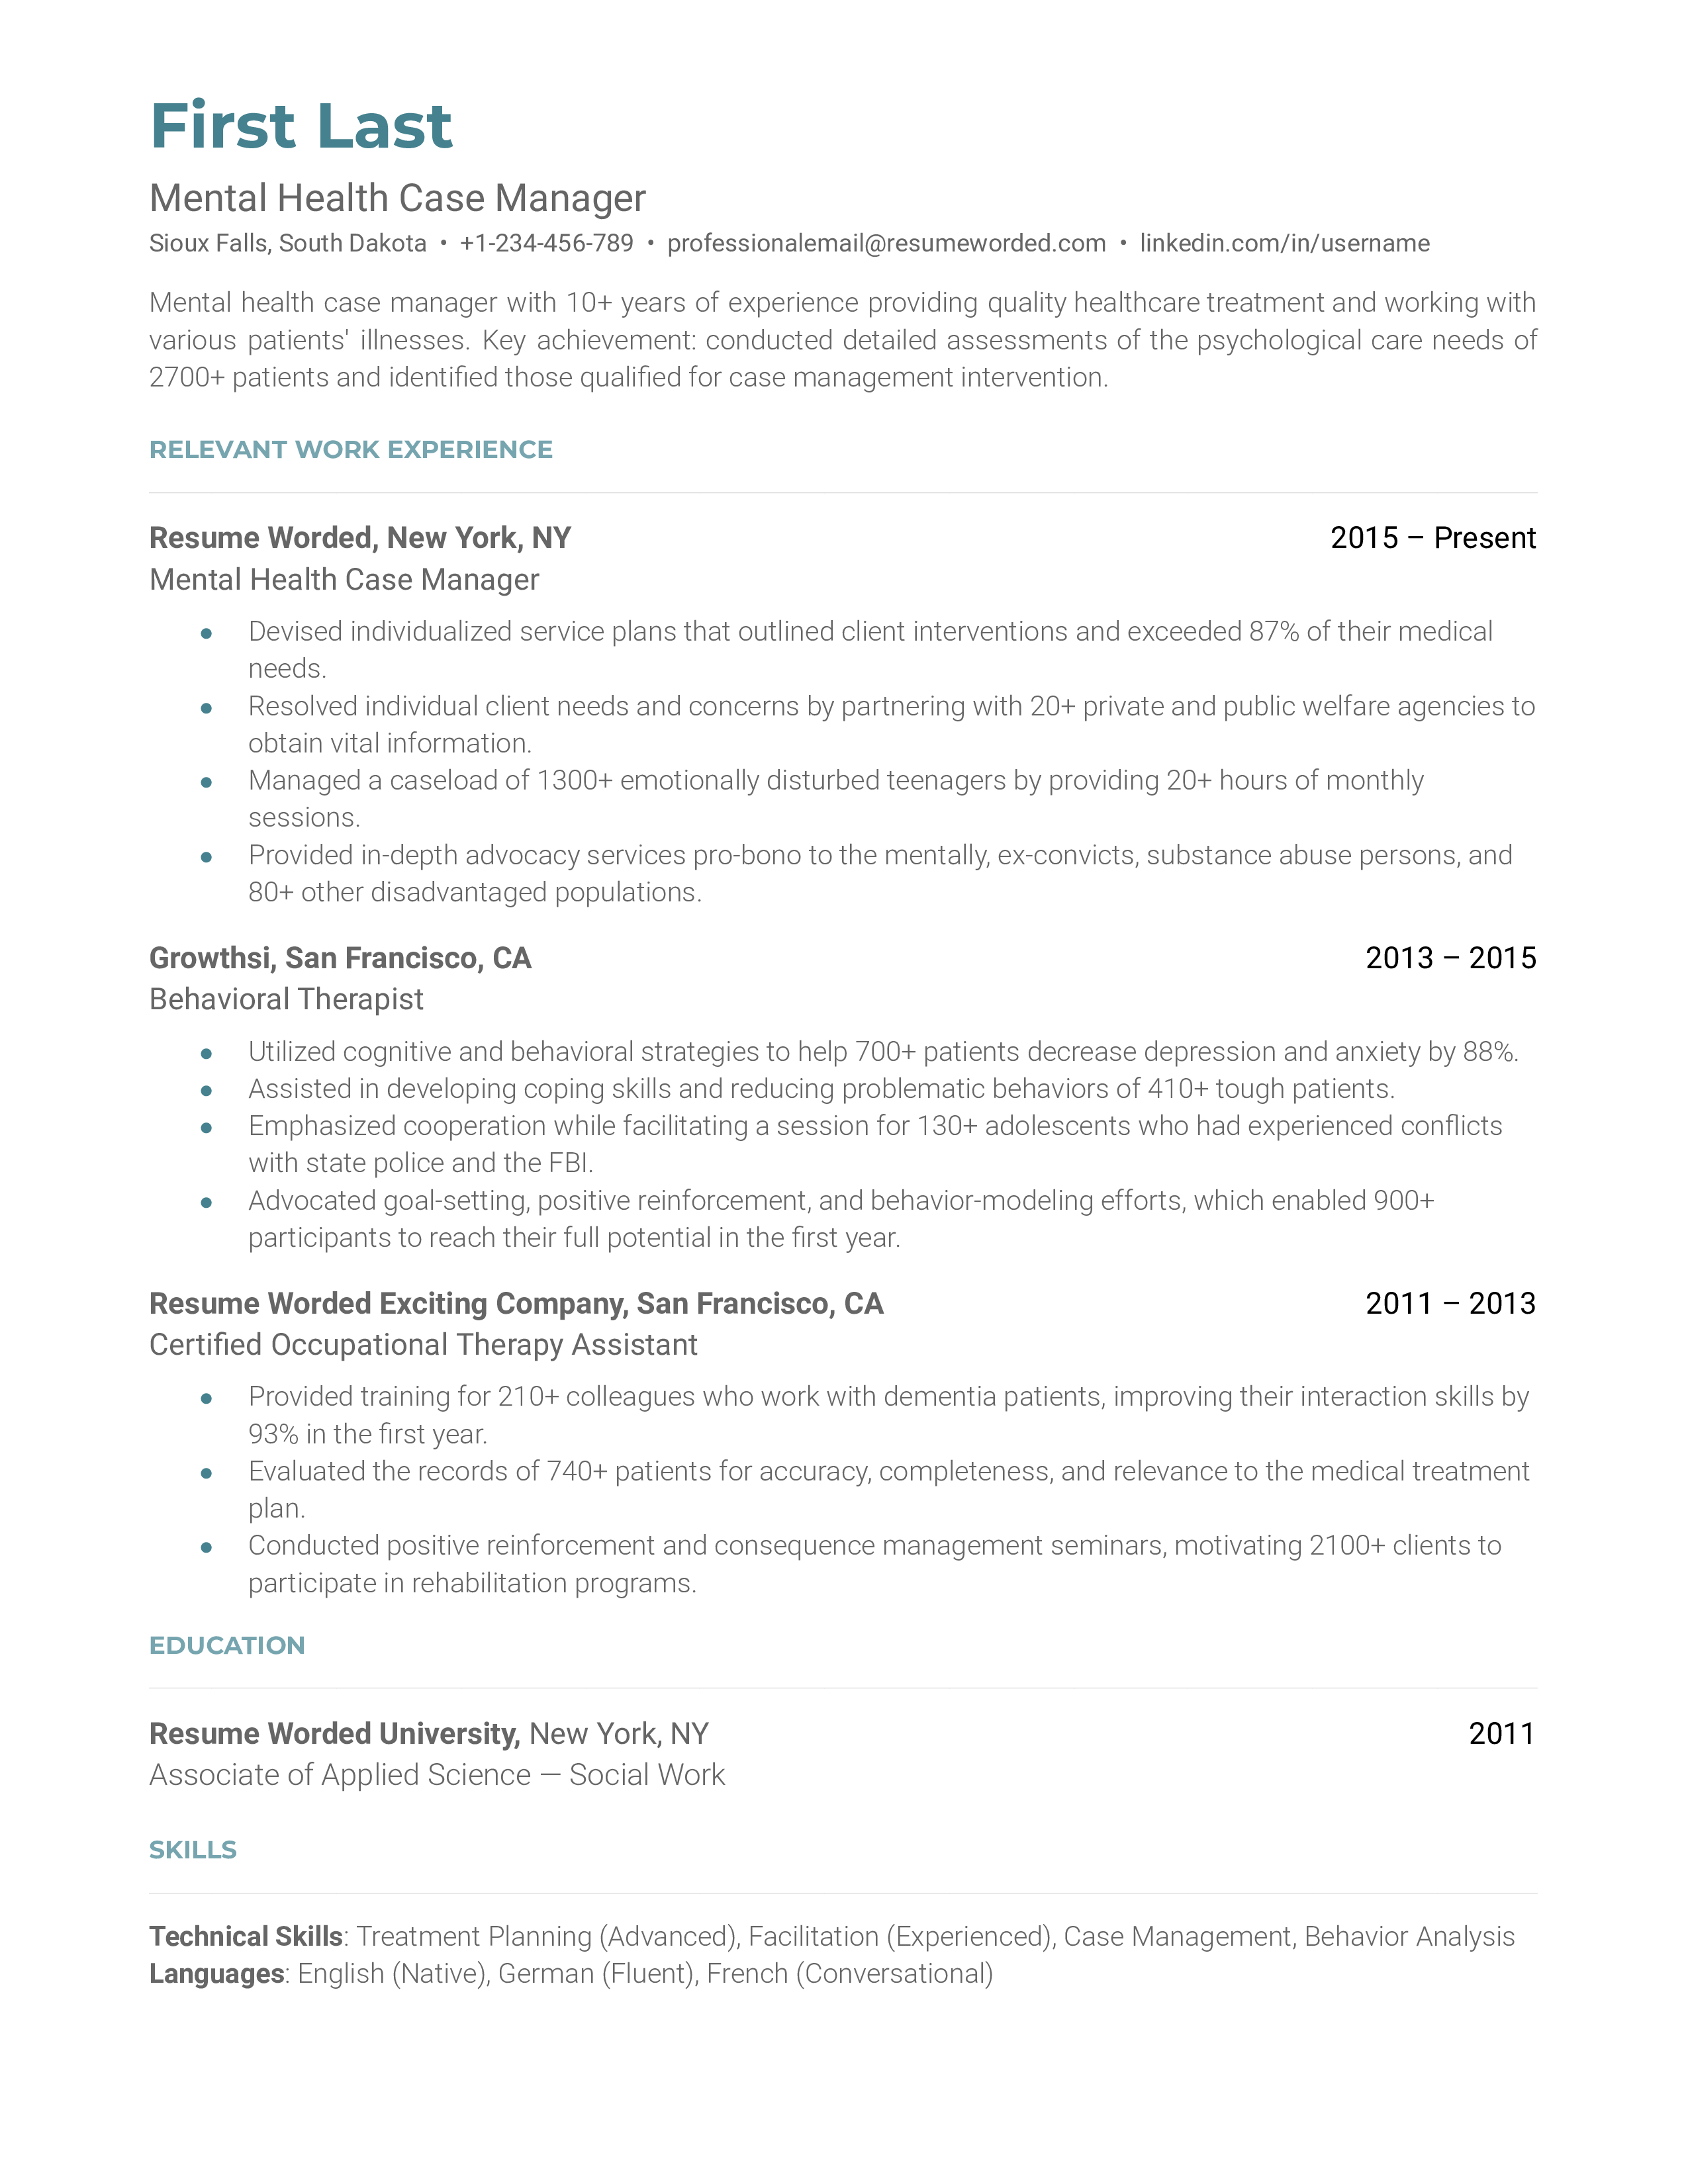 Screenshot of a Mental Health Case Manager's CV filled with relevant experiences and skills.